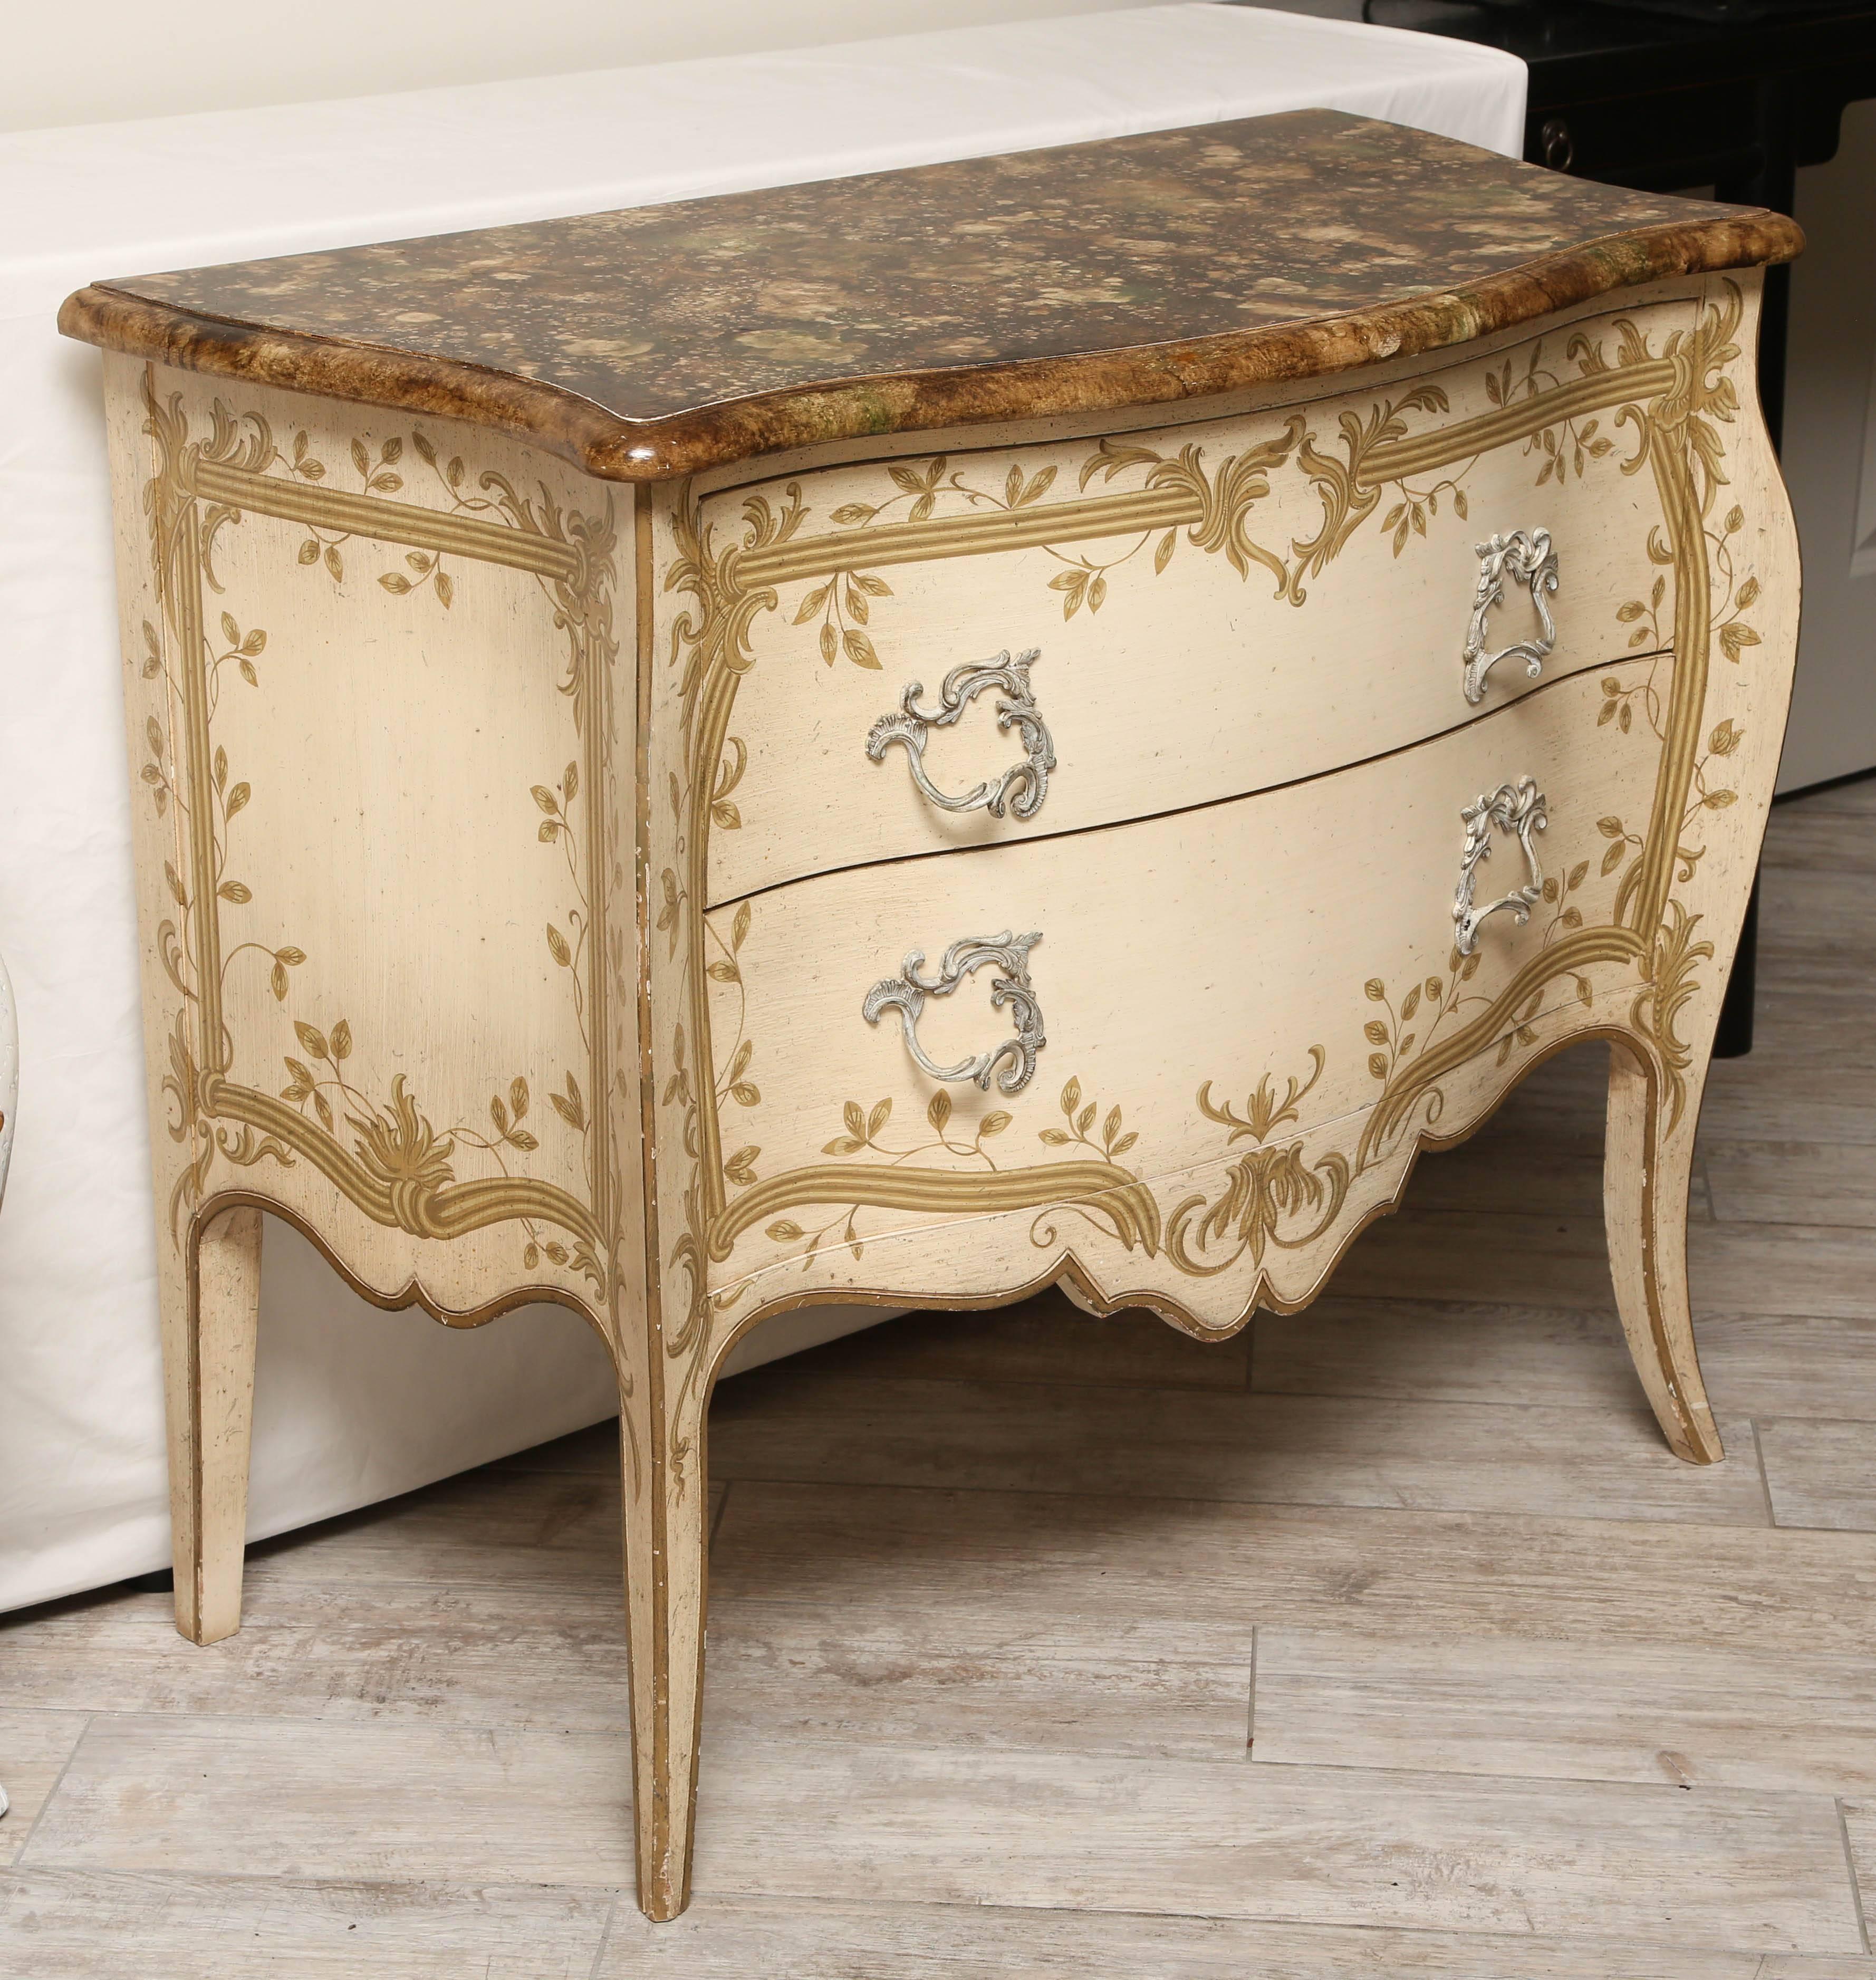 Lovely painted two-drawer chest with a leaf and trellis design.